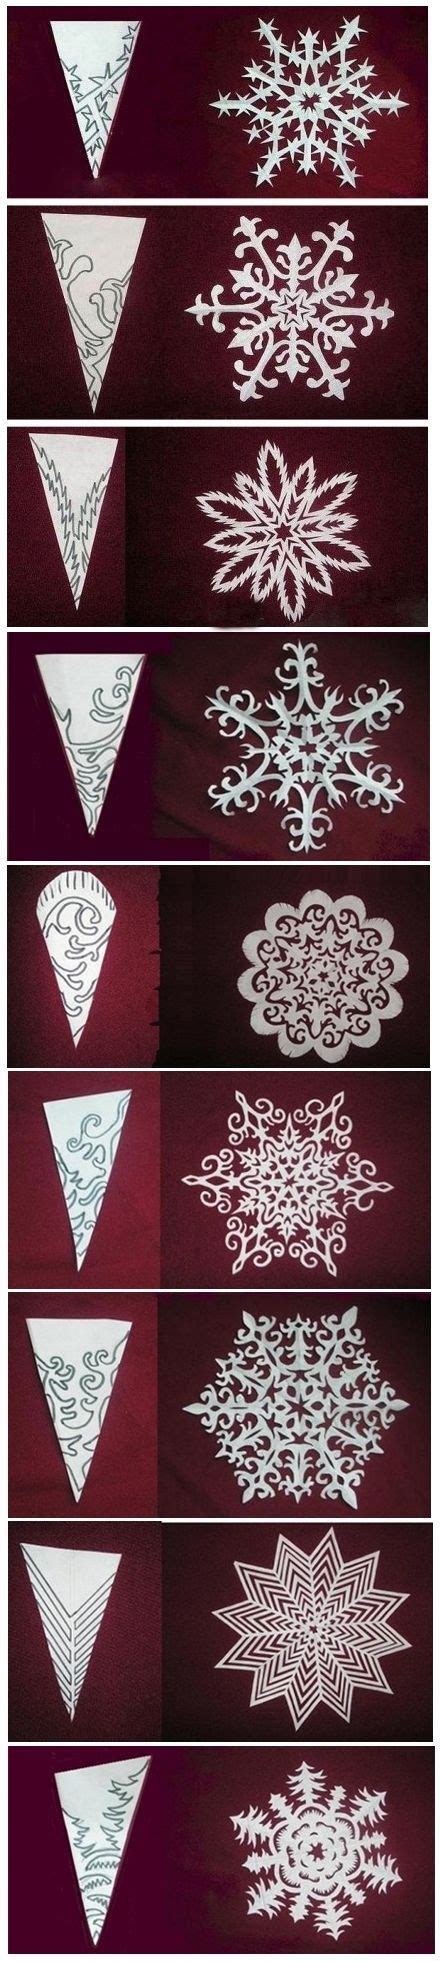 Snowflake Templates Winter Crafts Paper Crafts Diy Christmas Projects